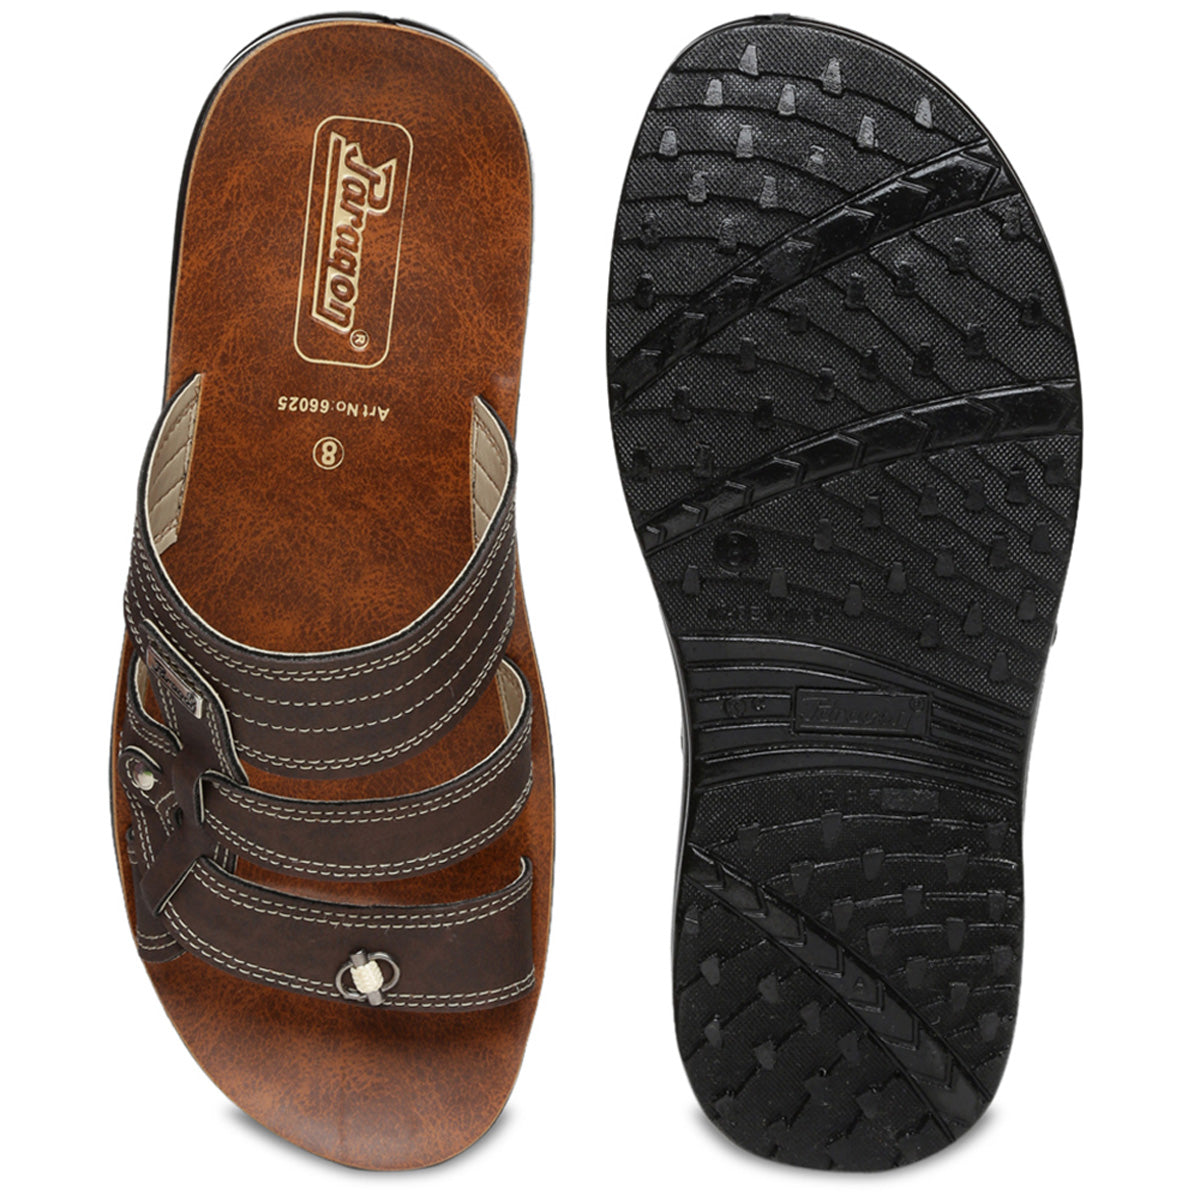 Paragon PU66025G Men Stylish Lightweight Flipflops | Comfortable with Anti skid soles | Casual &amp; Trendy Slippers | Indoor &amp; Outdoor